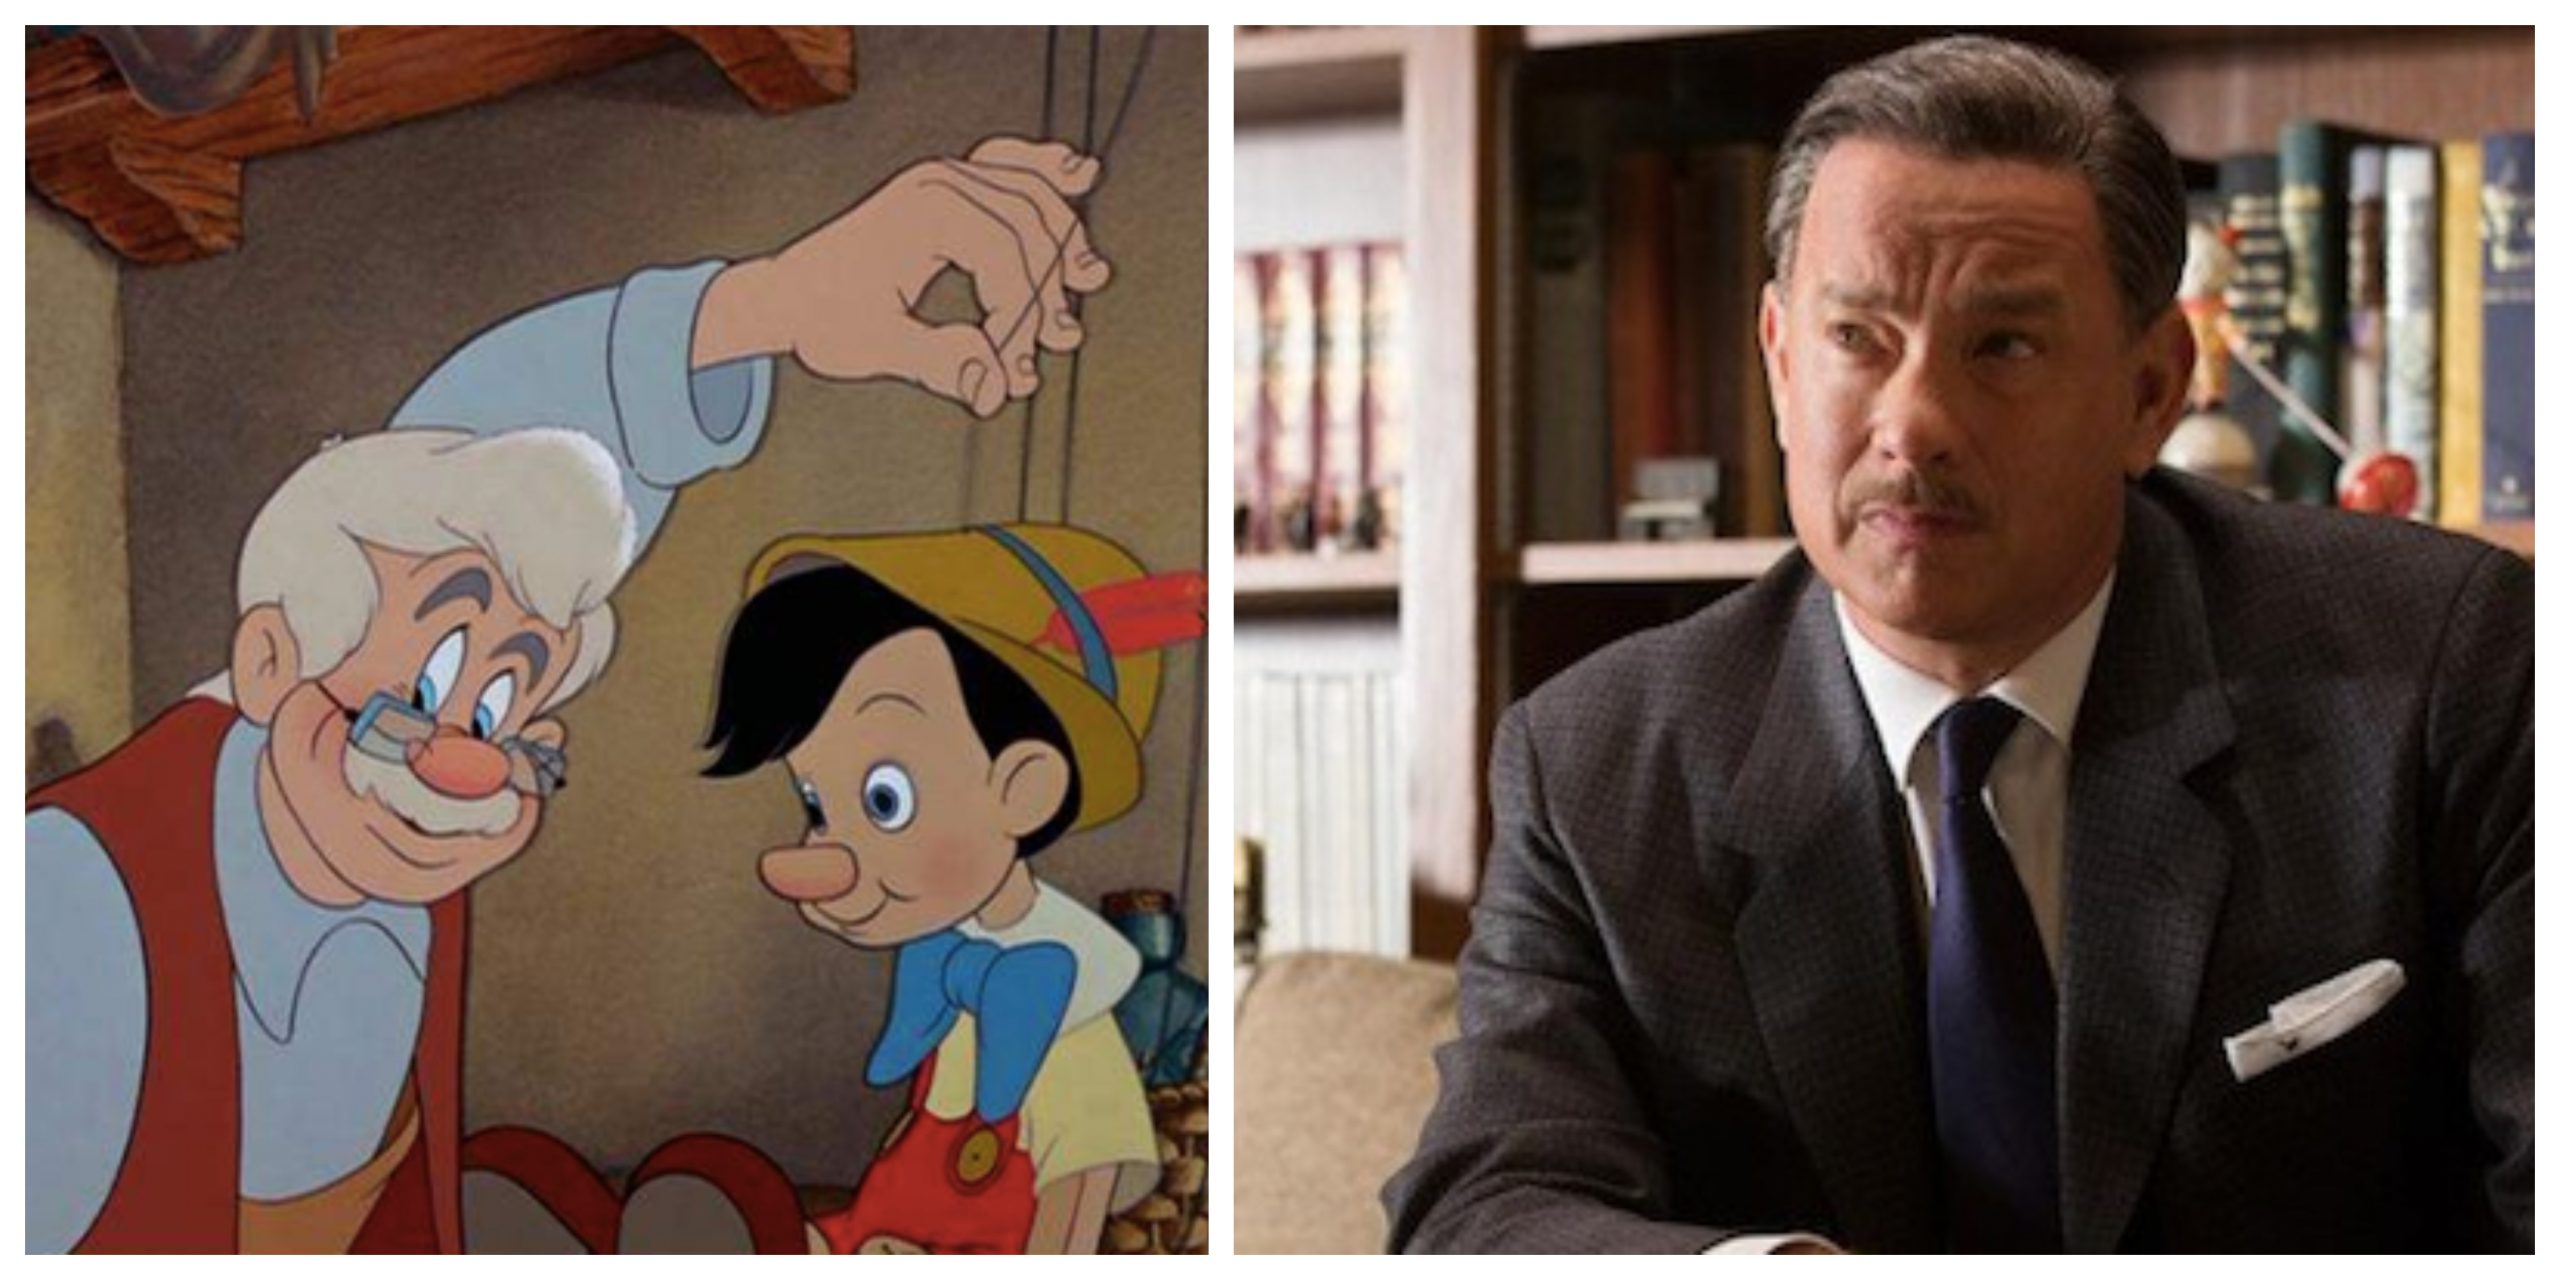 Tom Hanks In Talks to Play Geppetto in Disney’s Live Action Pinocchio